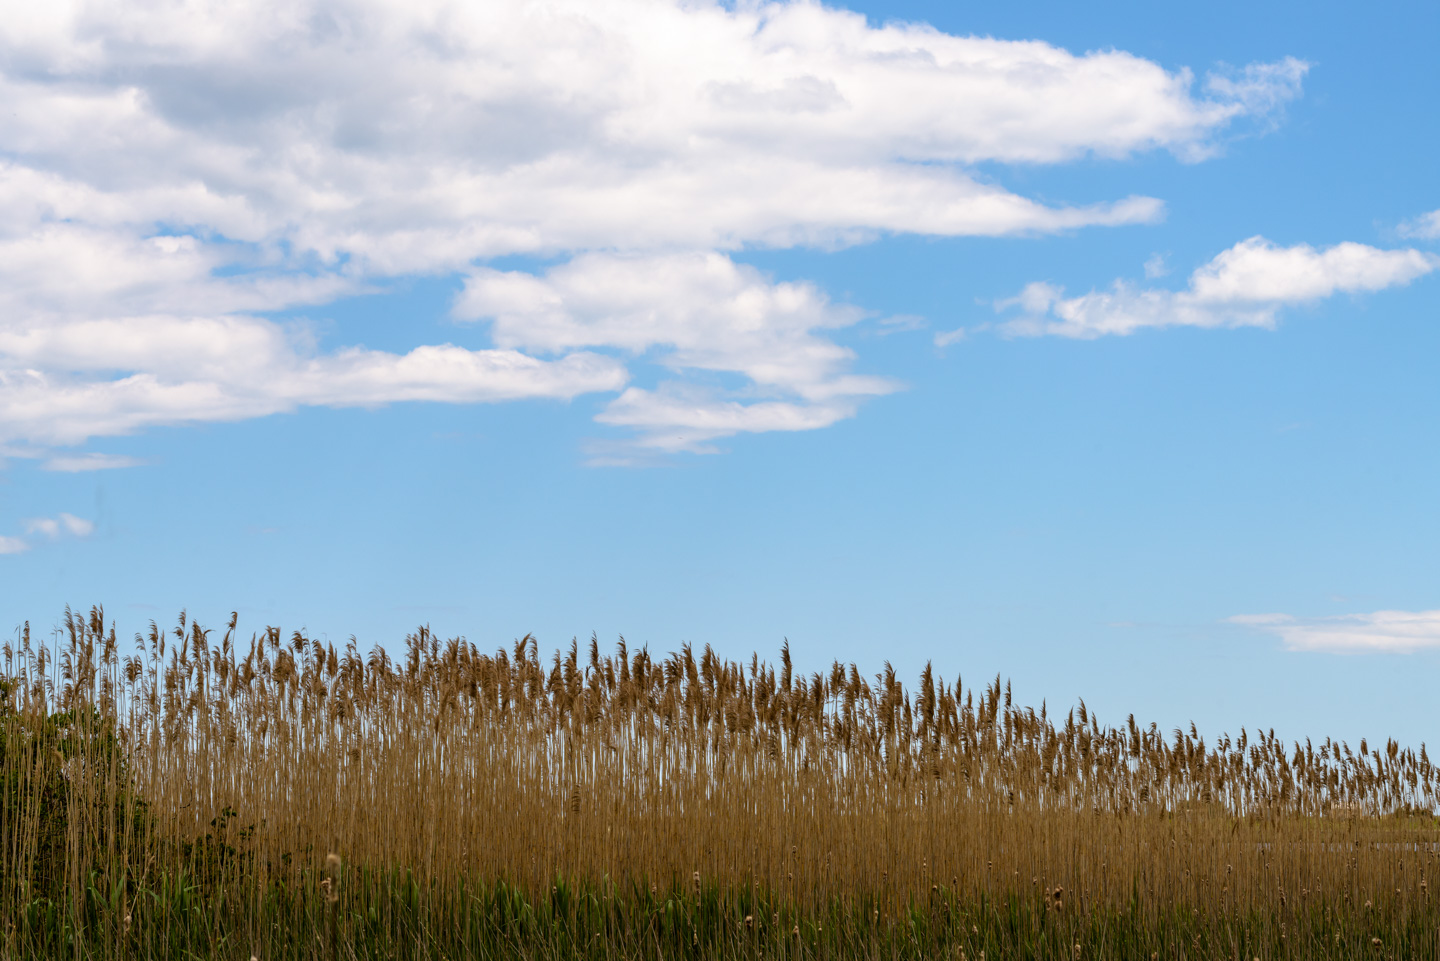 Tall marsh grasses with clouds